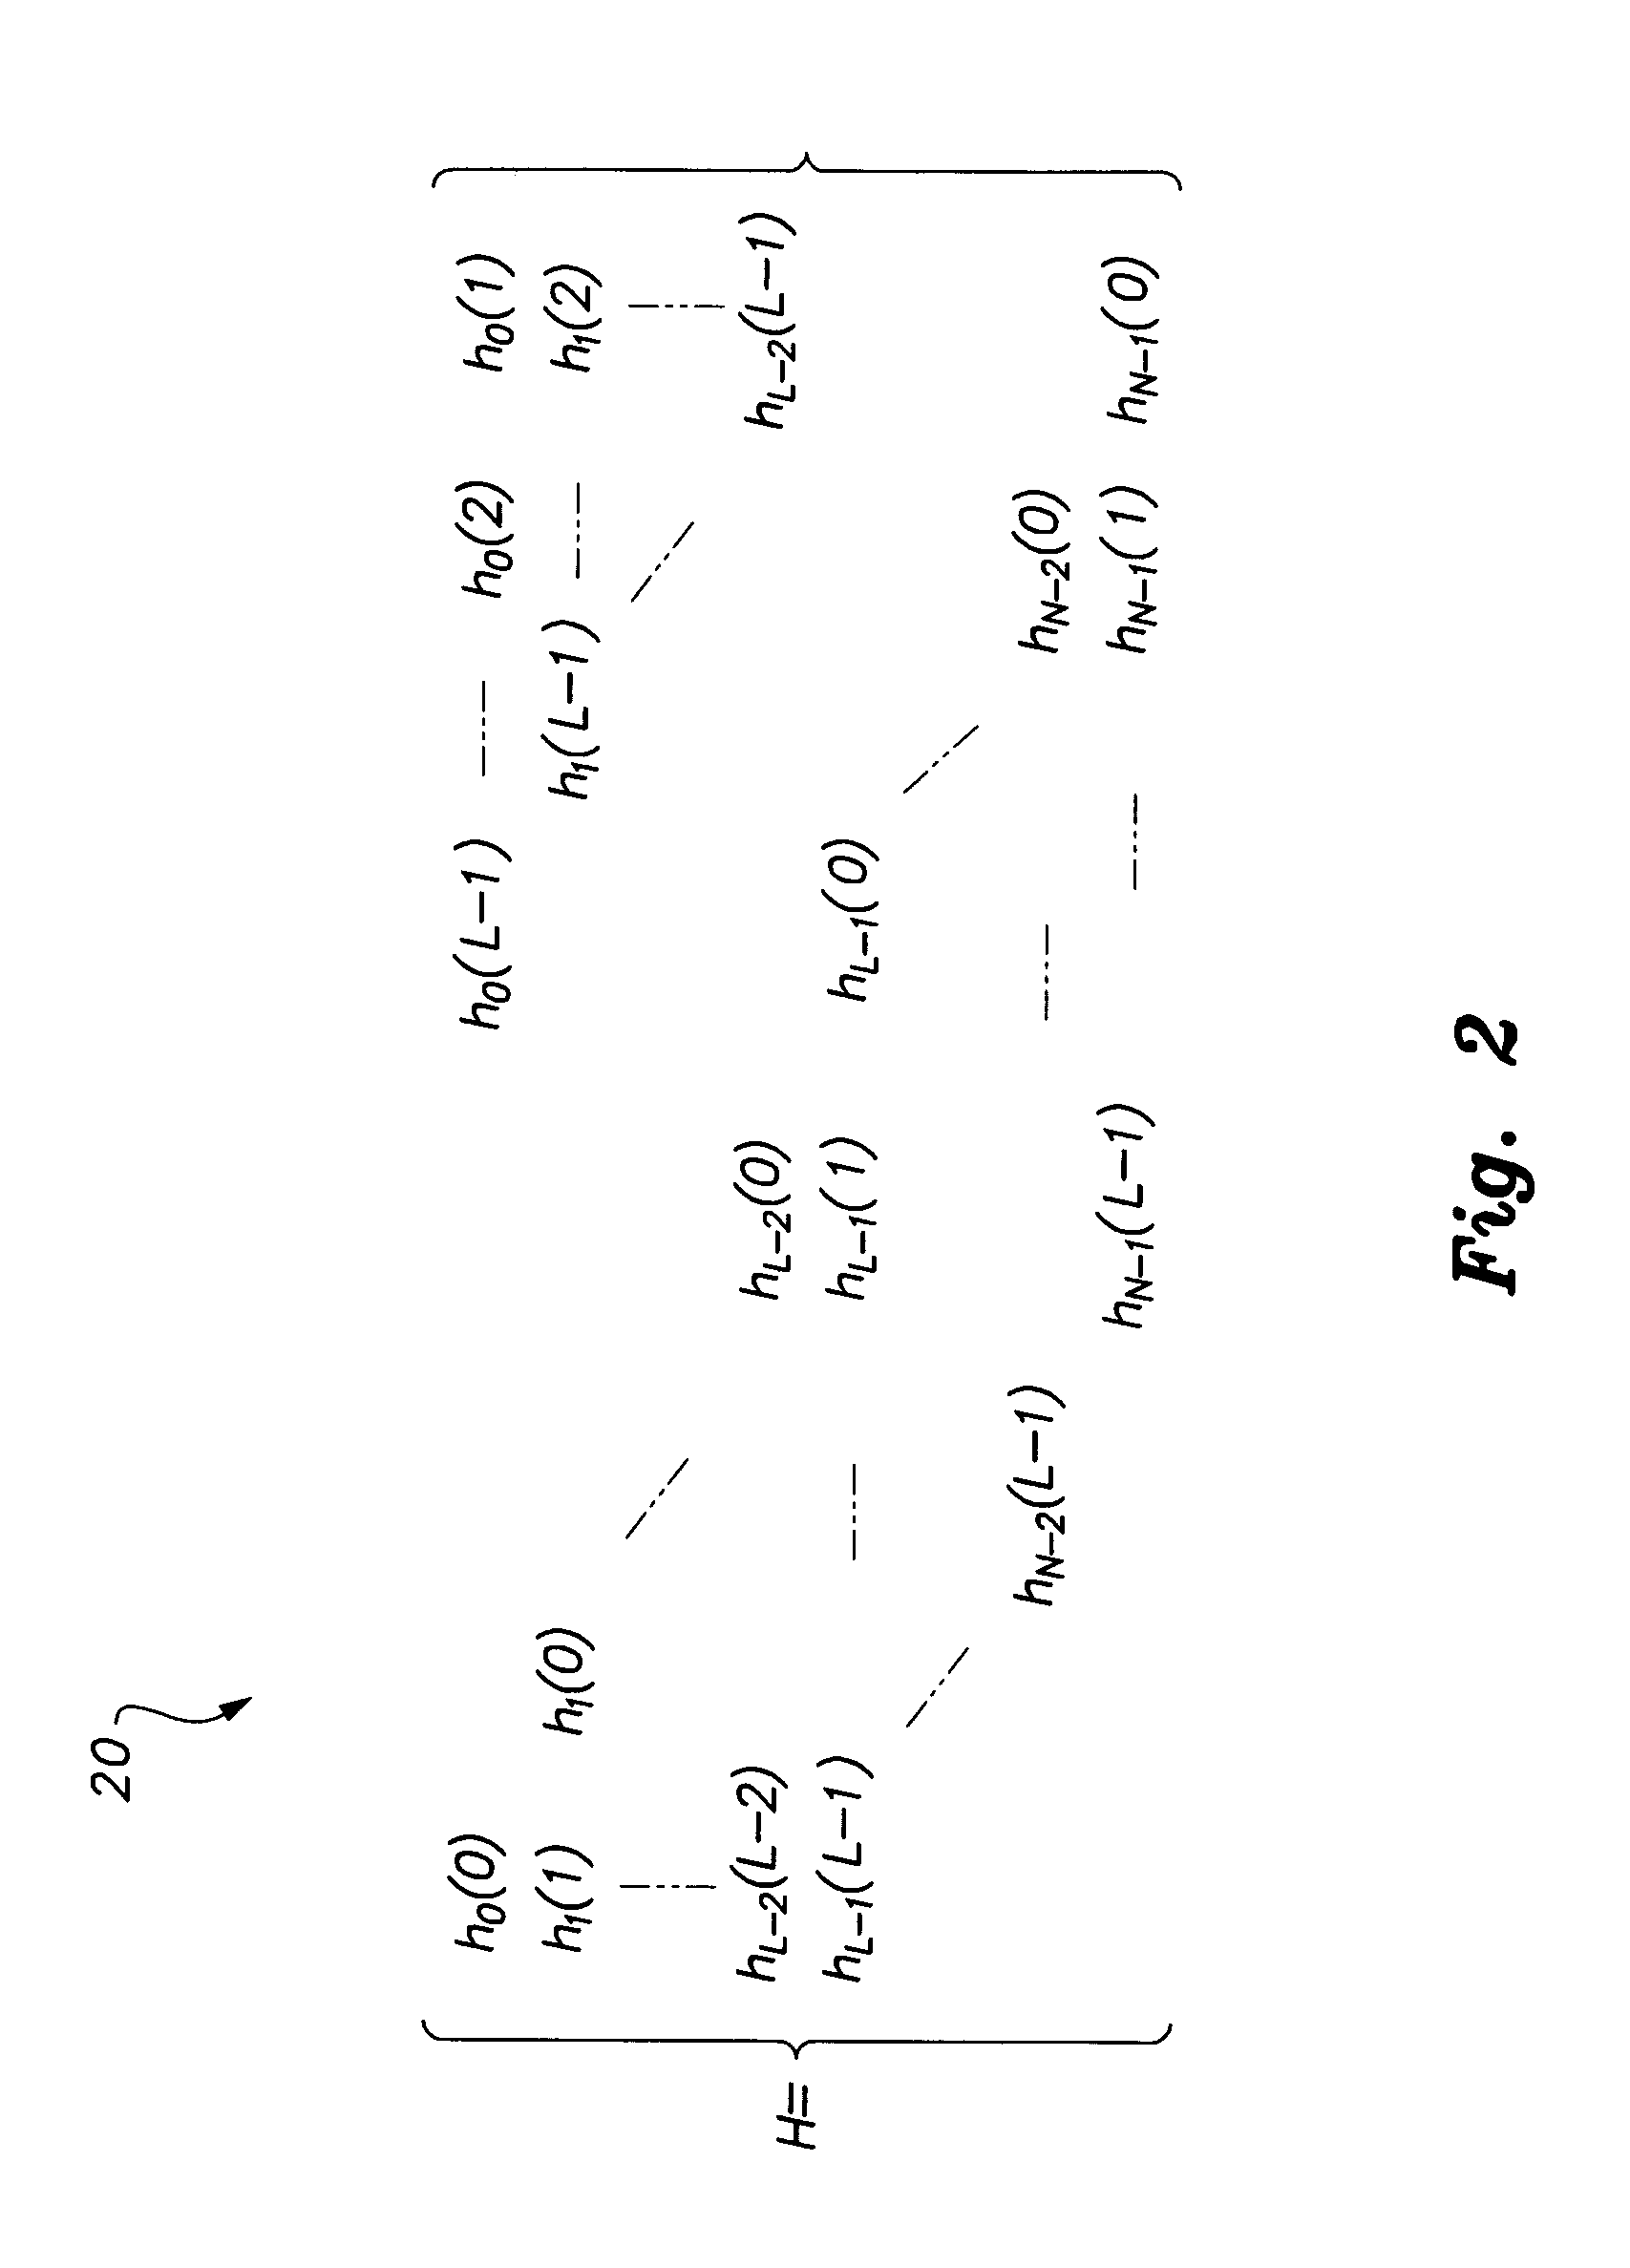 OFDM inter-carrier interference cancellation method